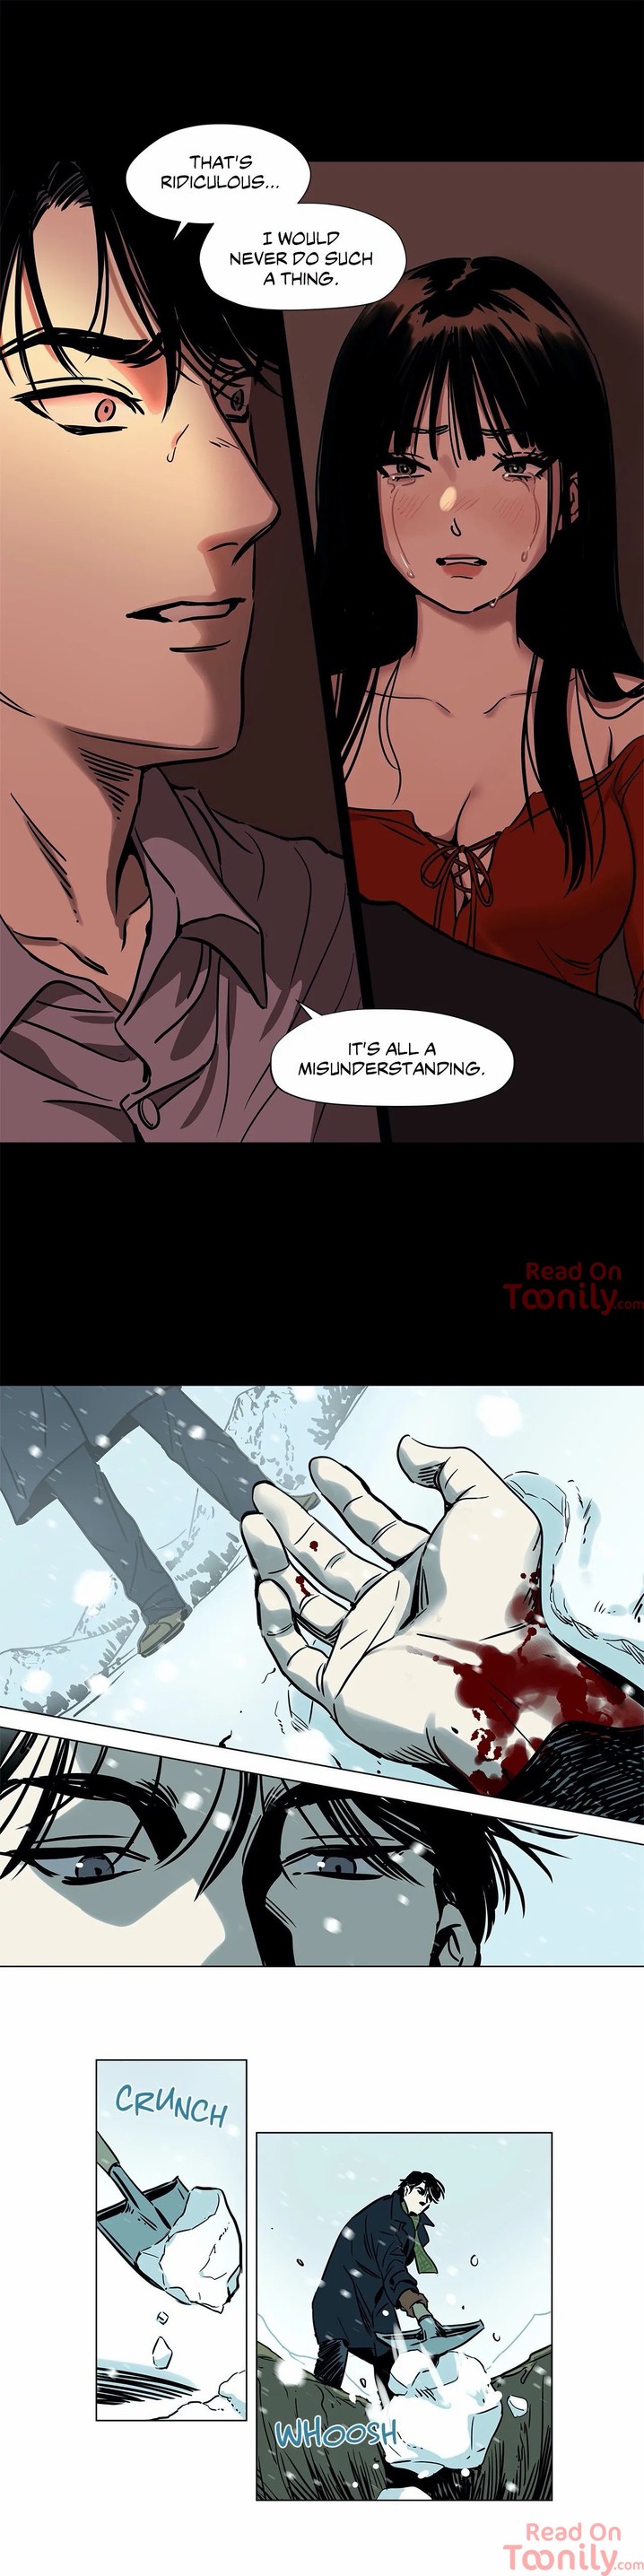 Snowman - Chapter 1 Page 3